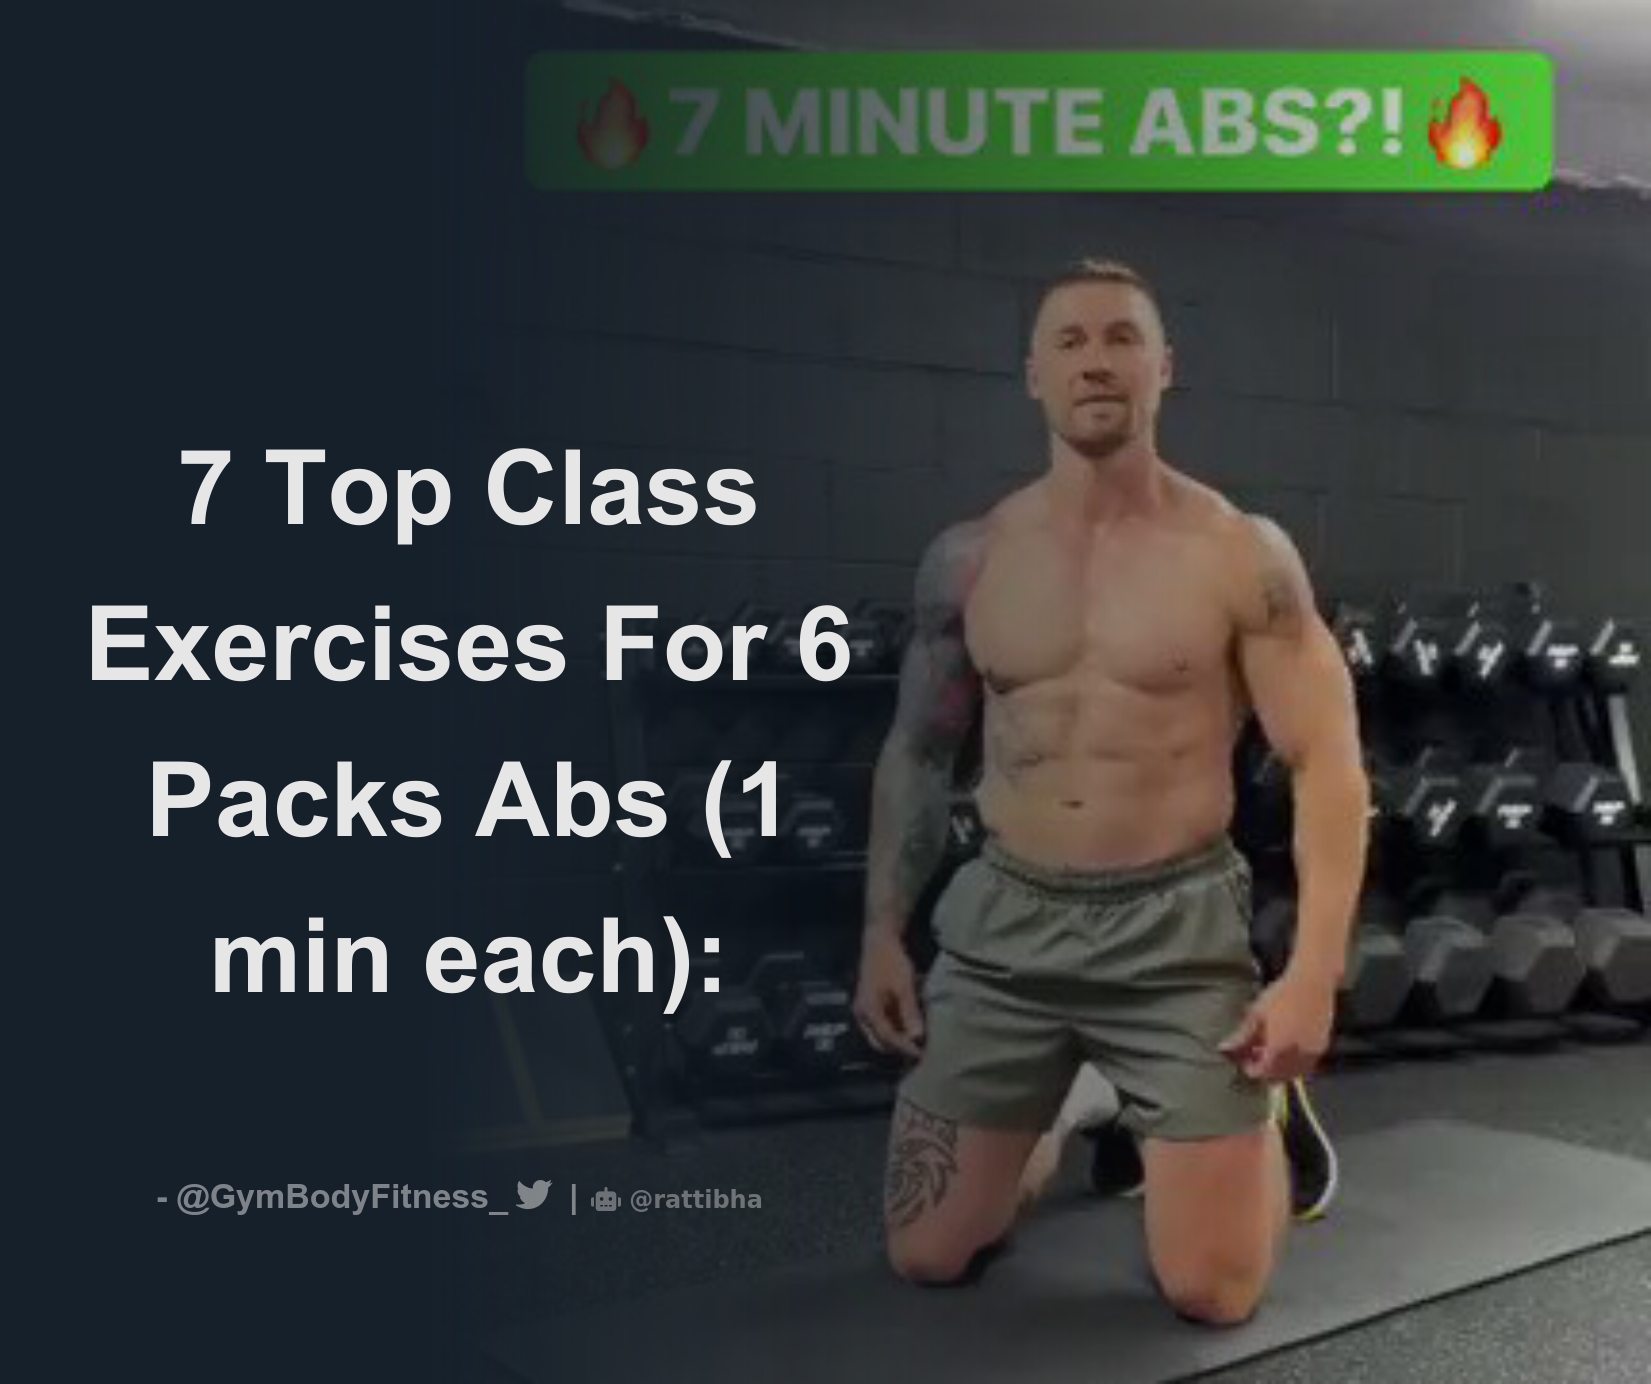 RIPPED Abs In 1 Minute!